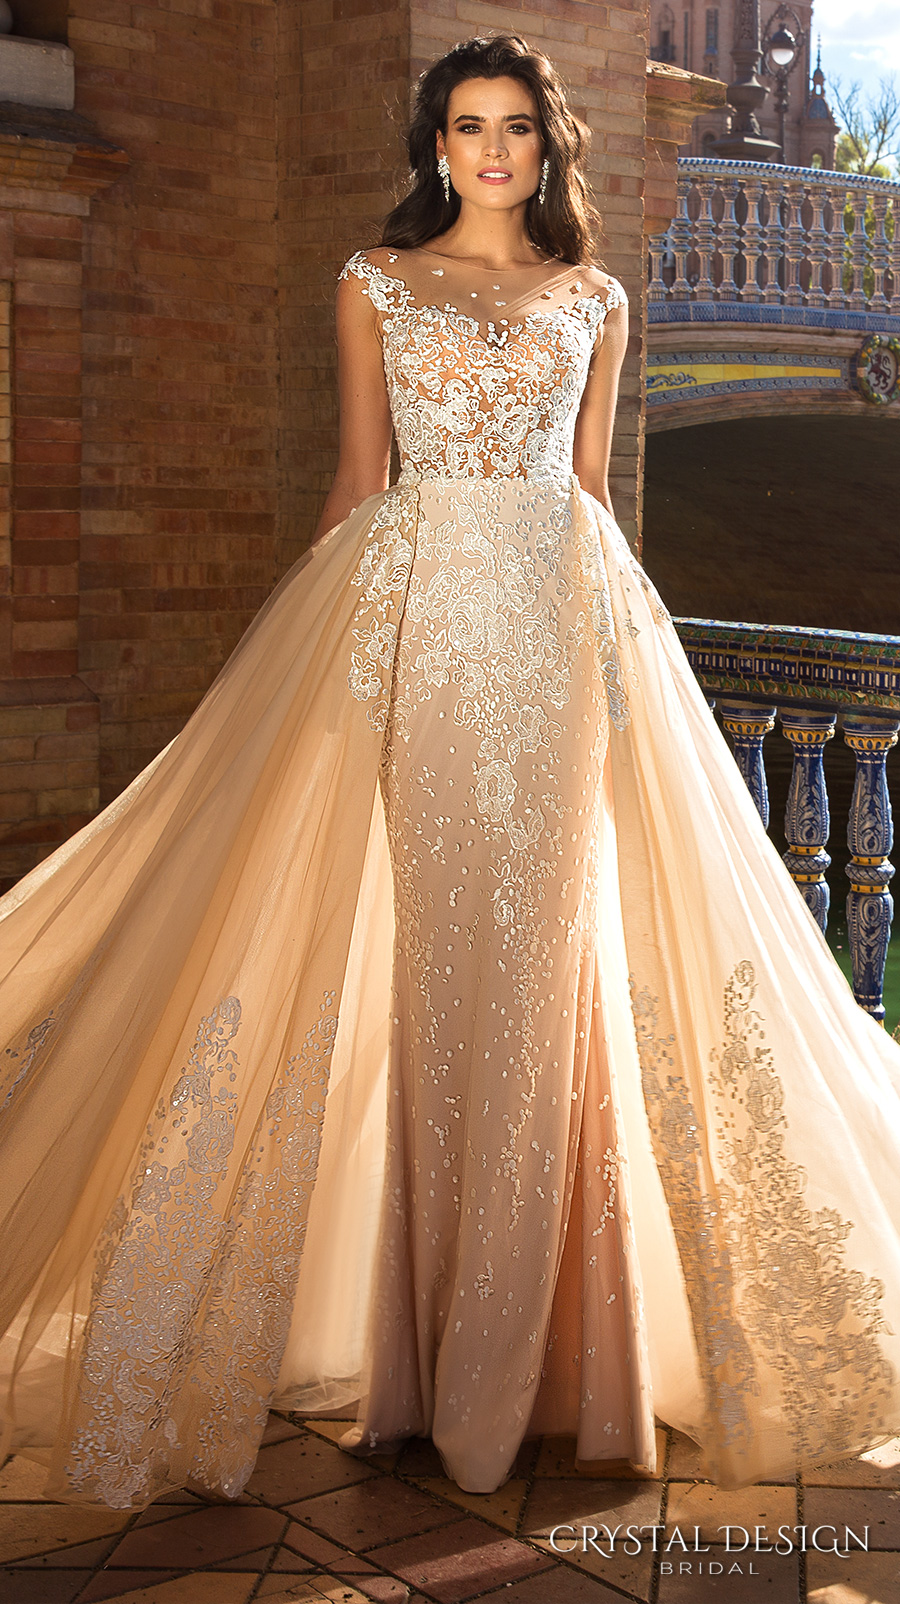 Help??off white wedding dress…what color veil?